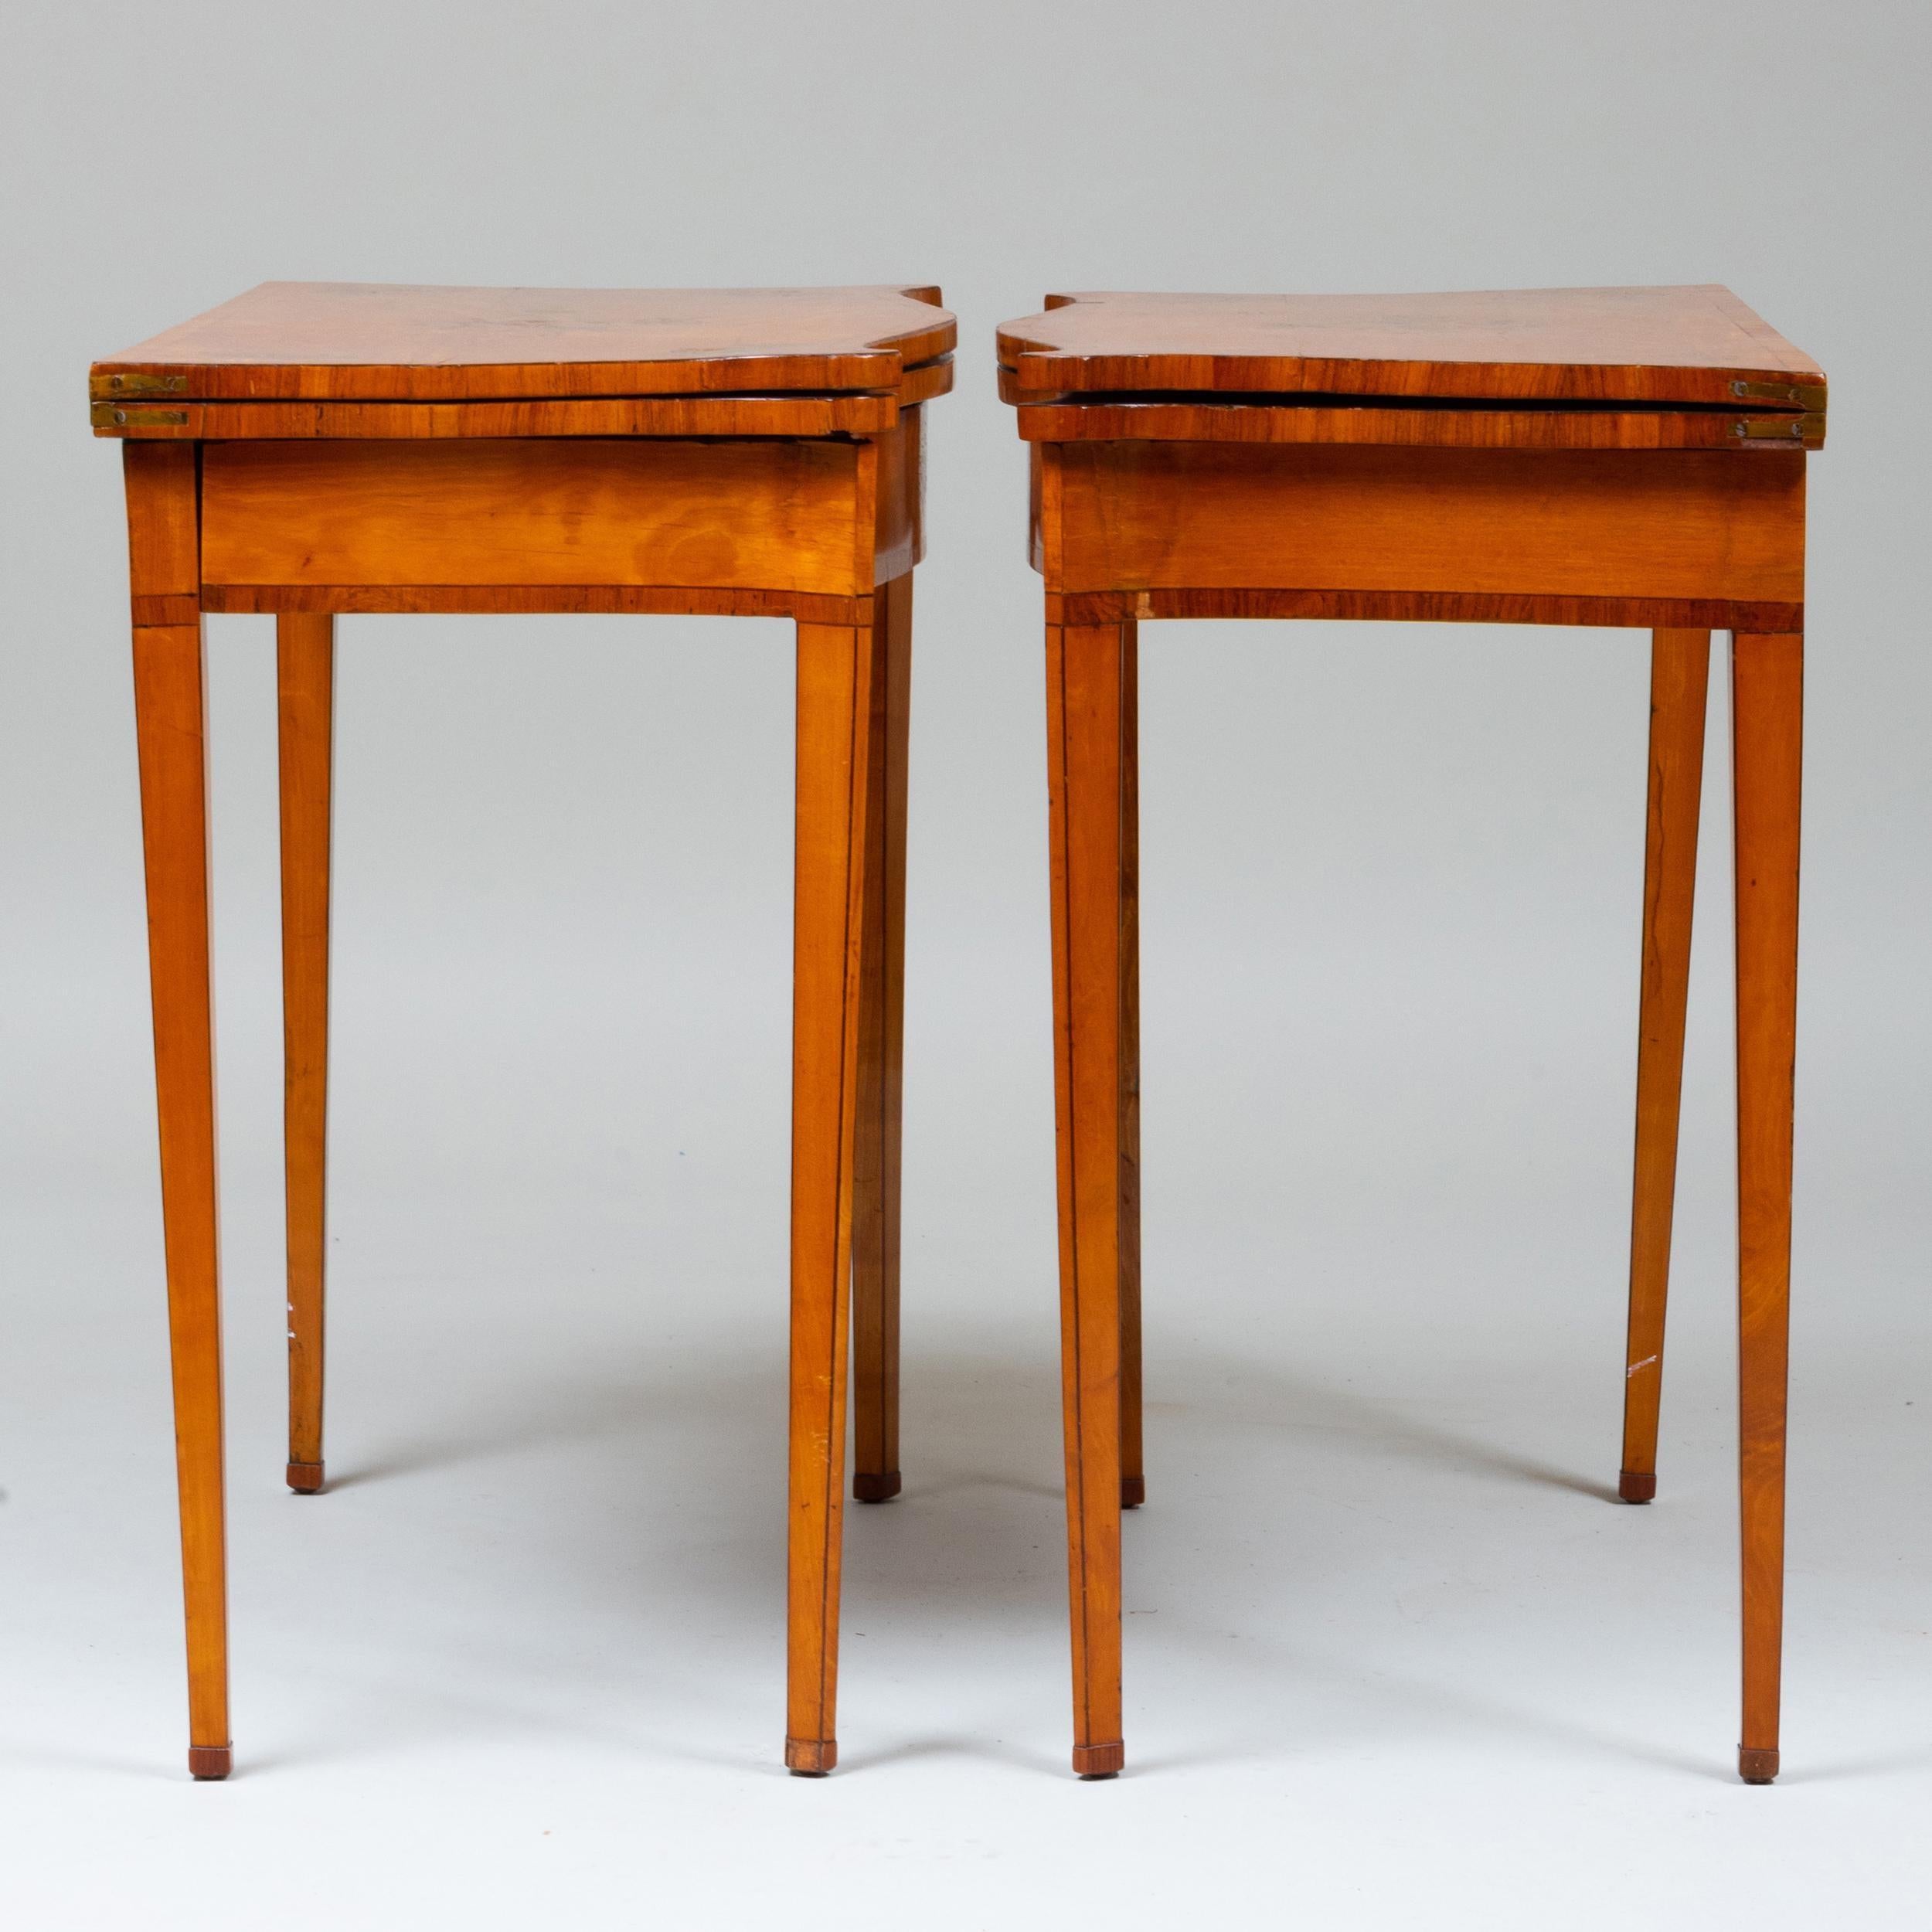 19th Century Fine Pair of George 111 Satinwood and Tulipwood Marquetry Game Tables For Sale